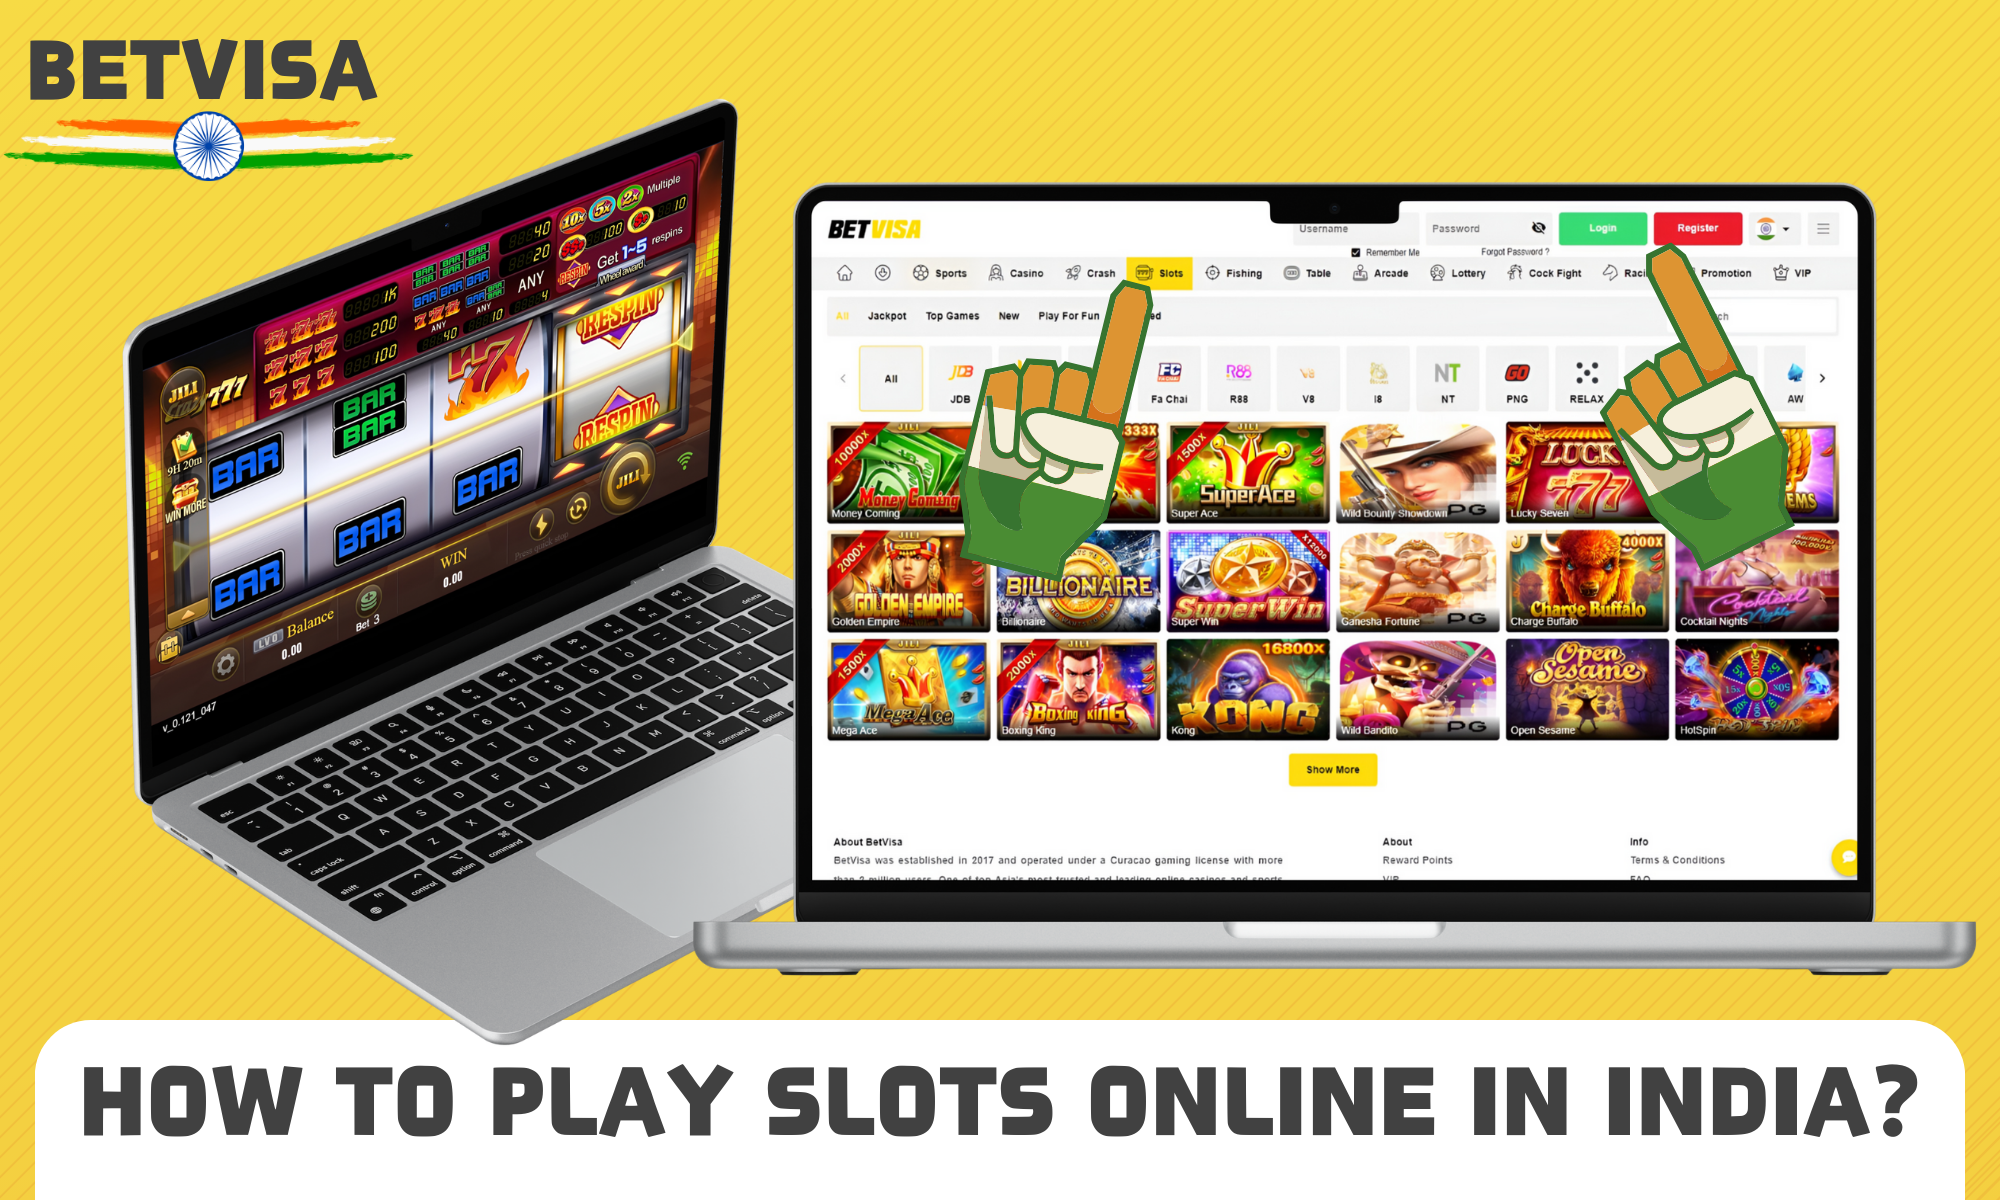 Instructions on how to start playing Betvisa slots